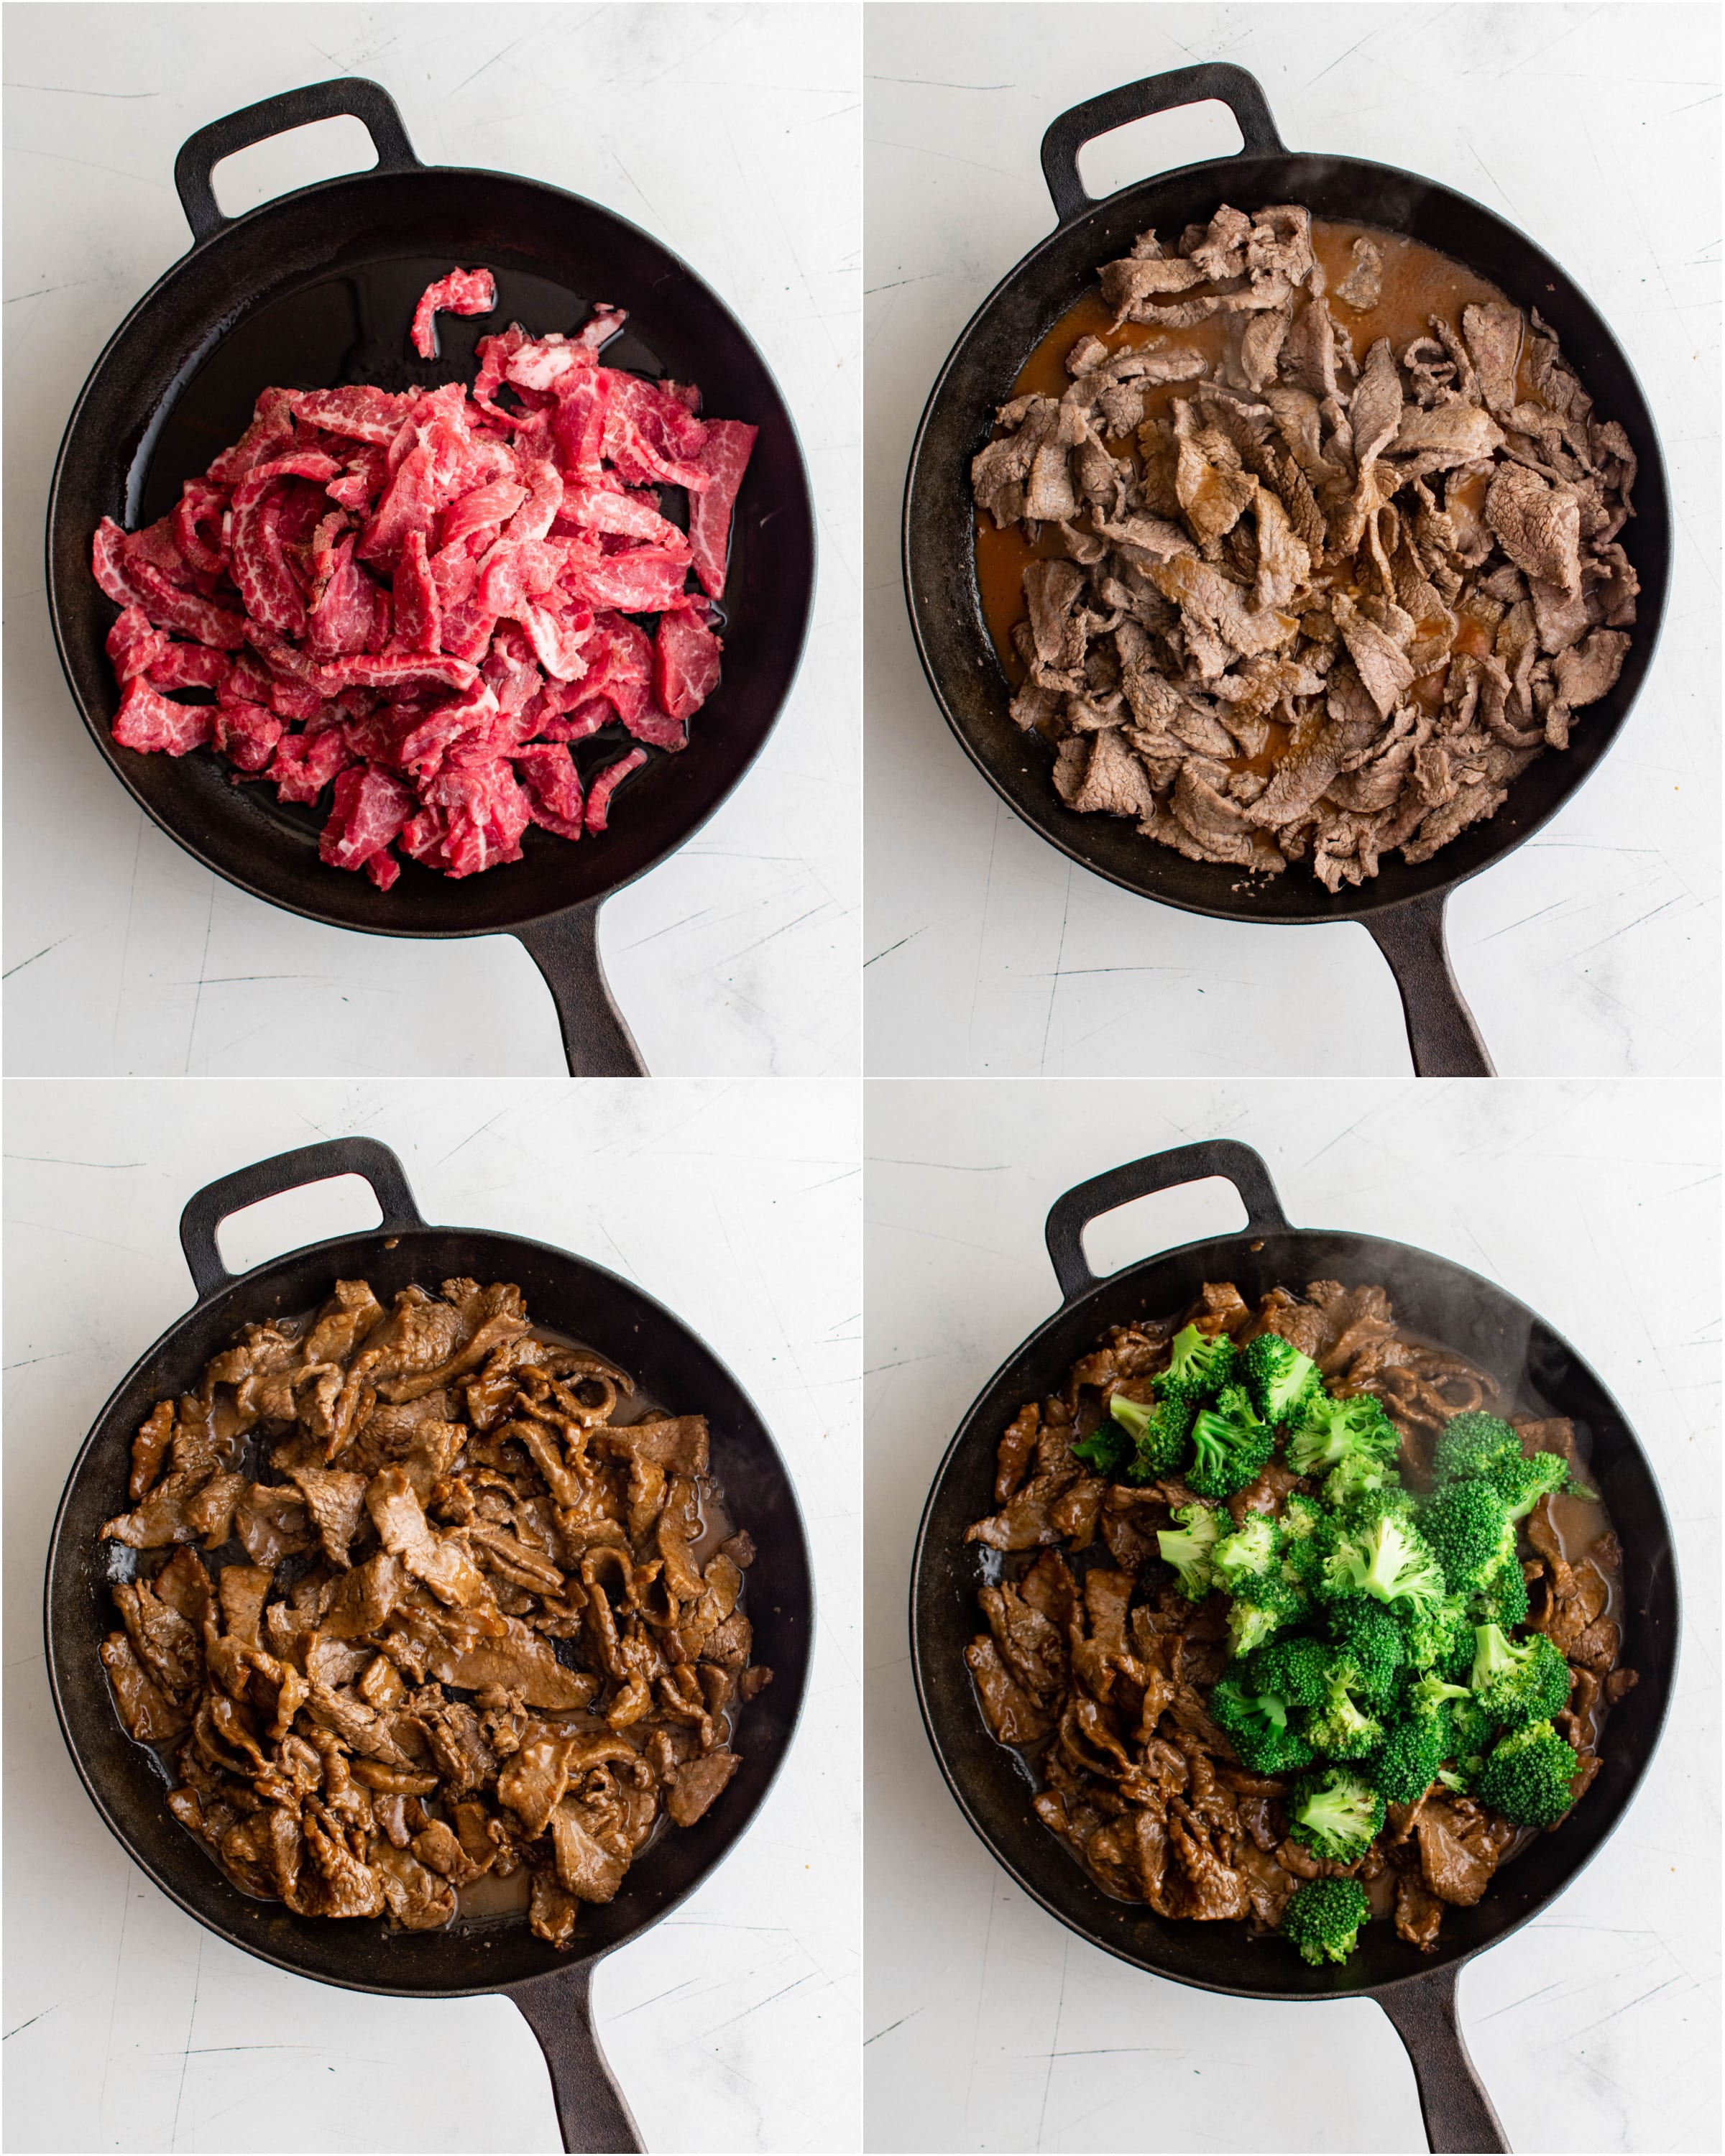 Four images in a collage: The first image shows thinly sliced flank steak added to a large cast iron skillet; the second image shows thinly sliced fully cooked skirt steak in a cast iron skillet; the fourth image shows thin slices of steak simmering in a brown sauce made from soy sauce, brown sugar, rice wine vinegar, and cornstarch in a large cast iron skillet; the fourth image shows blanched broccoli added to a large cast iron skillet filled with Chinese beef.